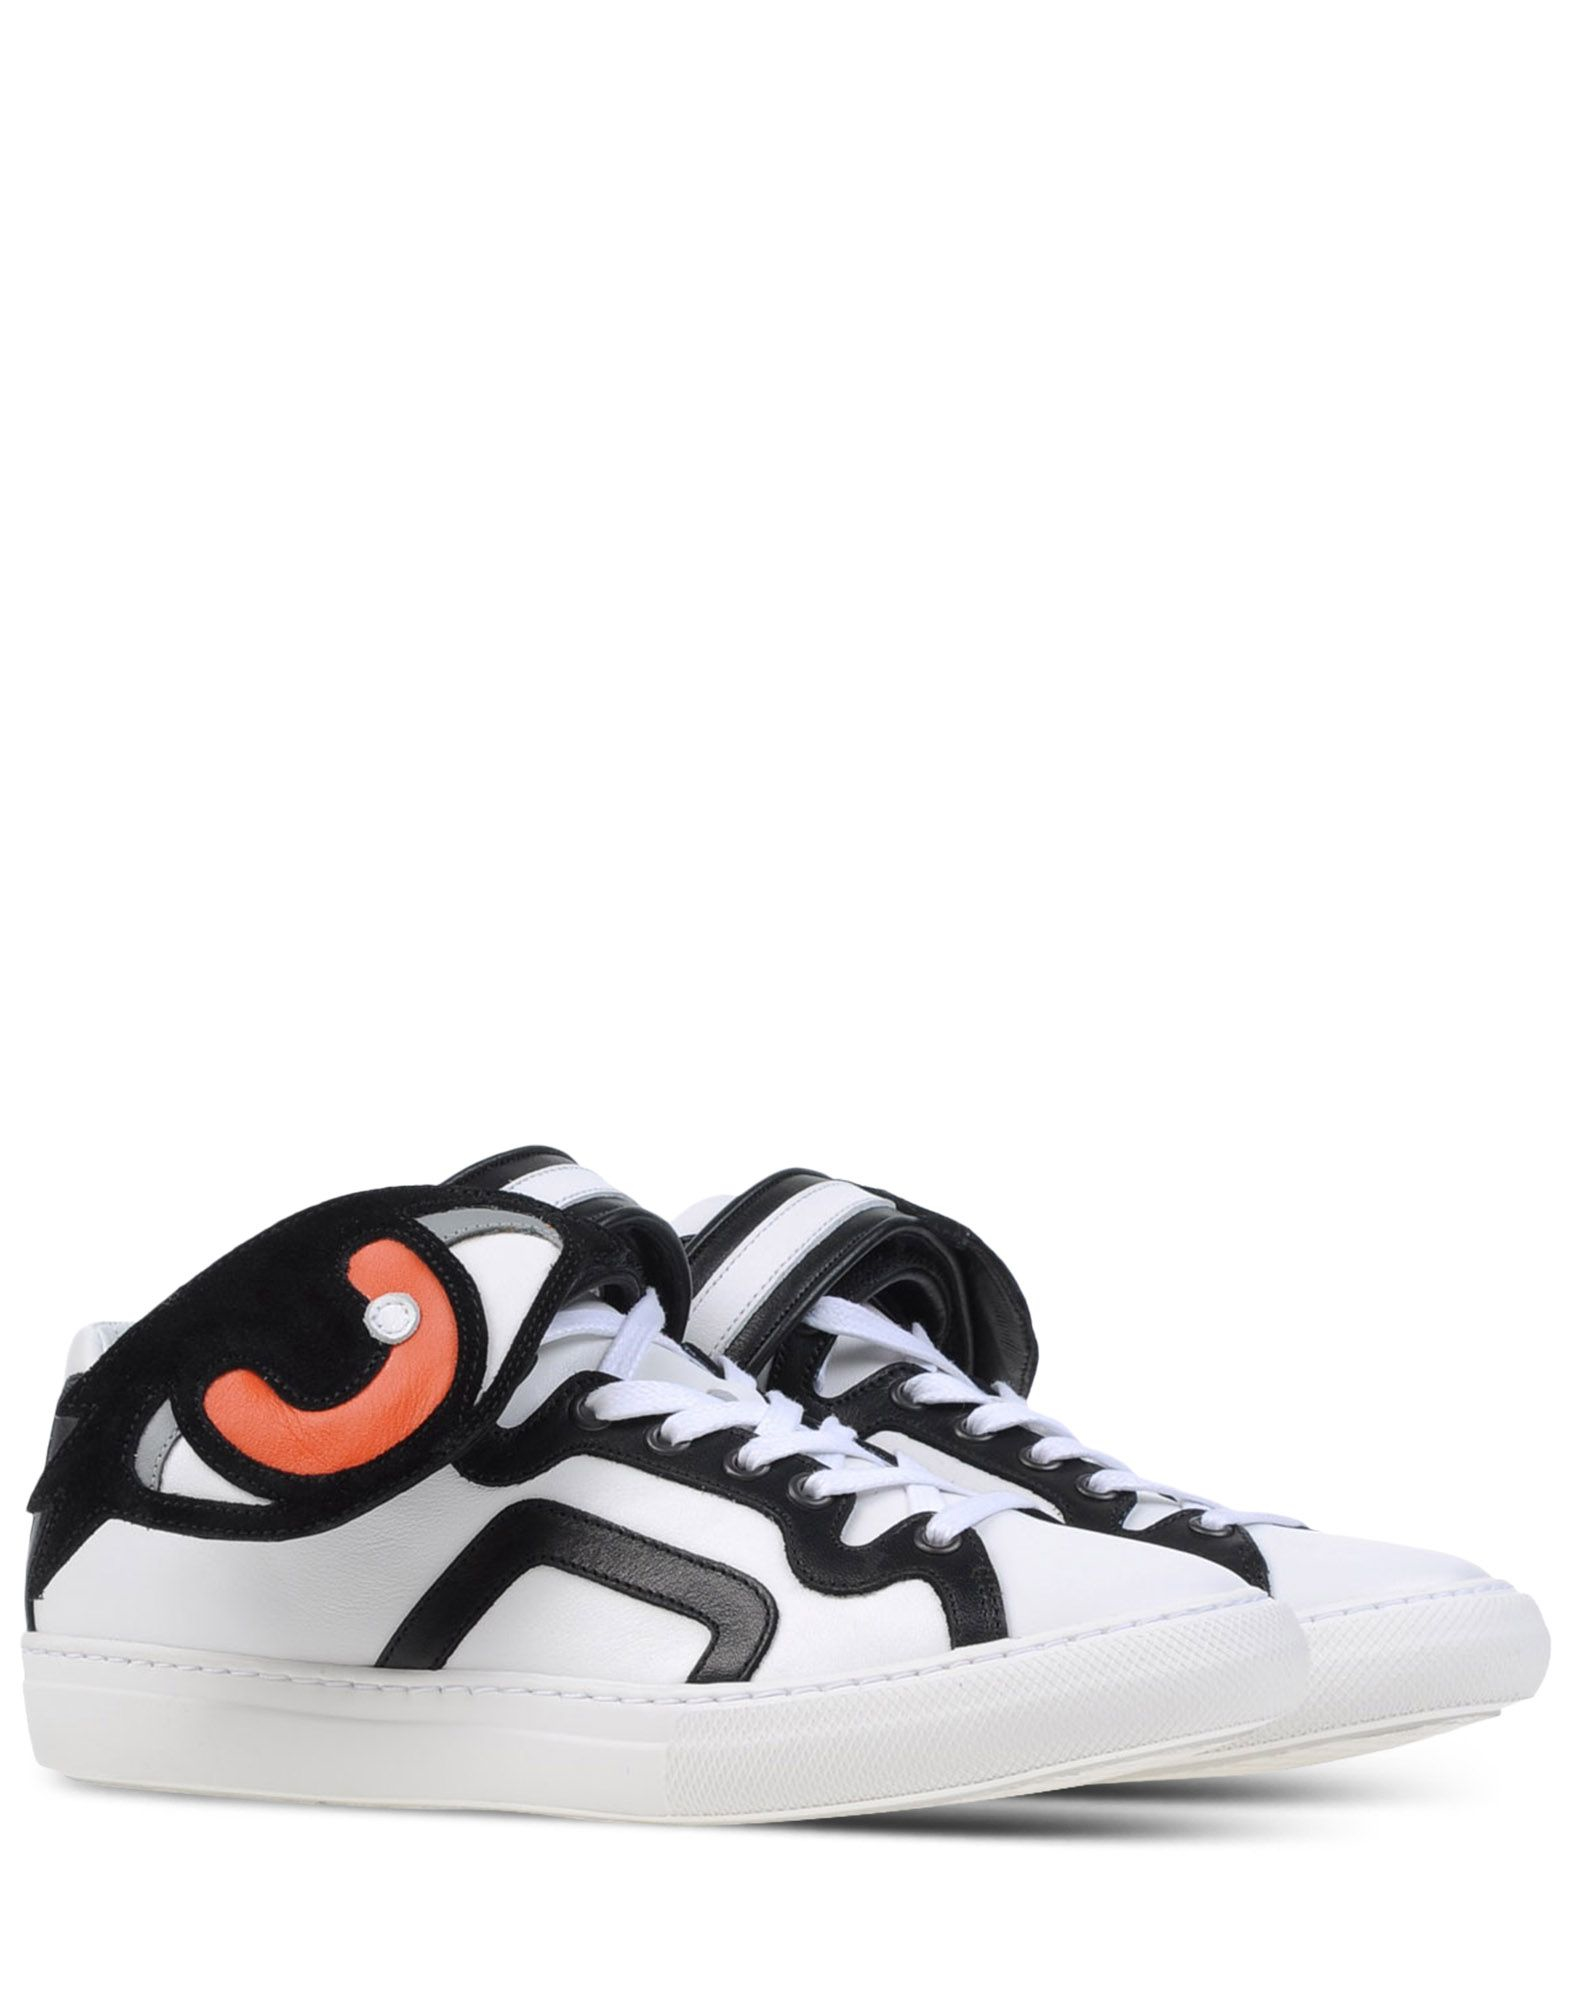 Pierre hardy Low-tops & Trainers in White | Lyst